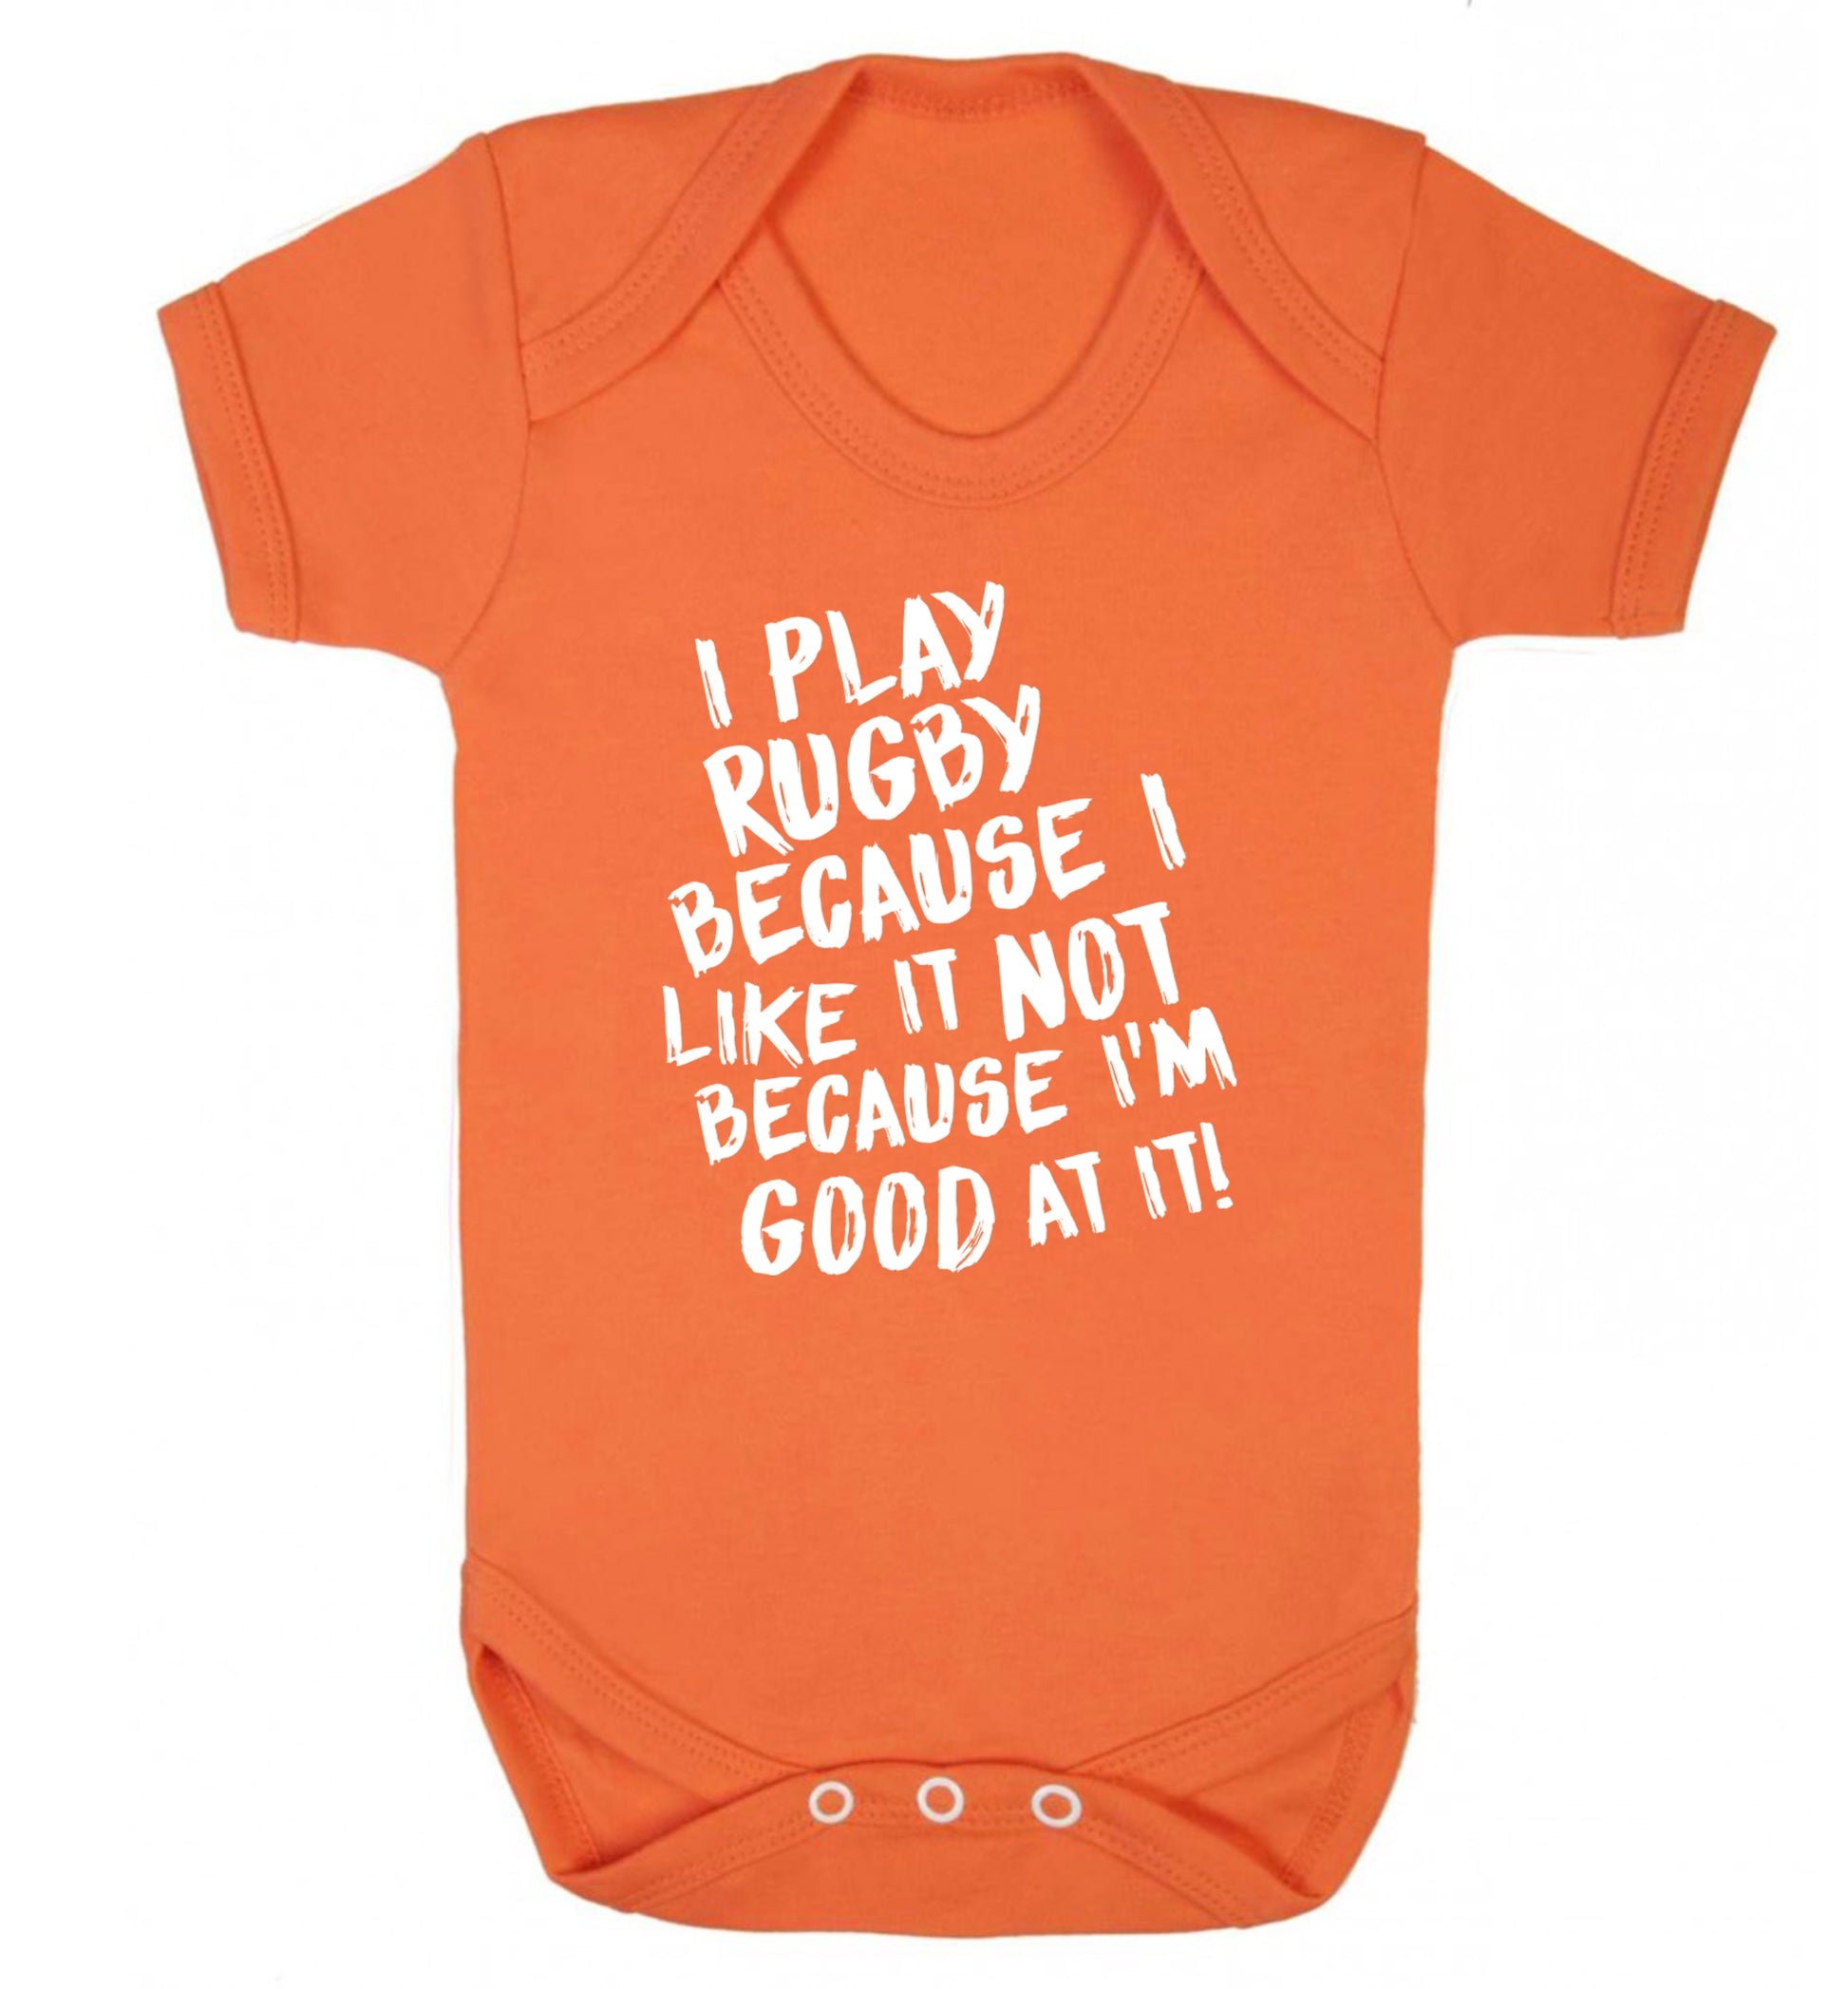 I play rugby because I like it not because I'm good at it Baby Vest orange 18-24 months